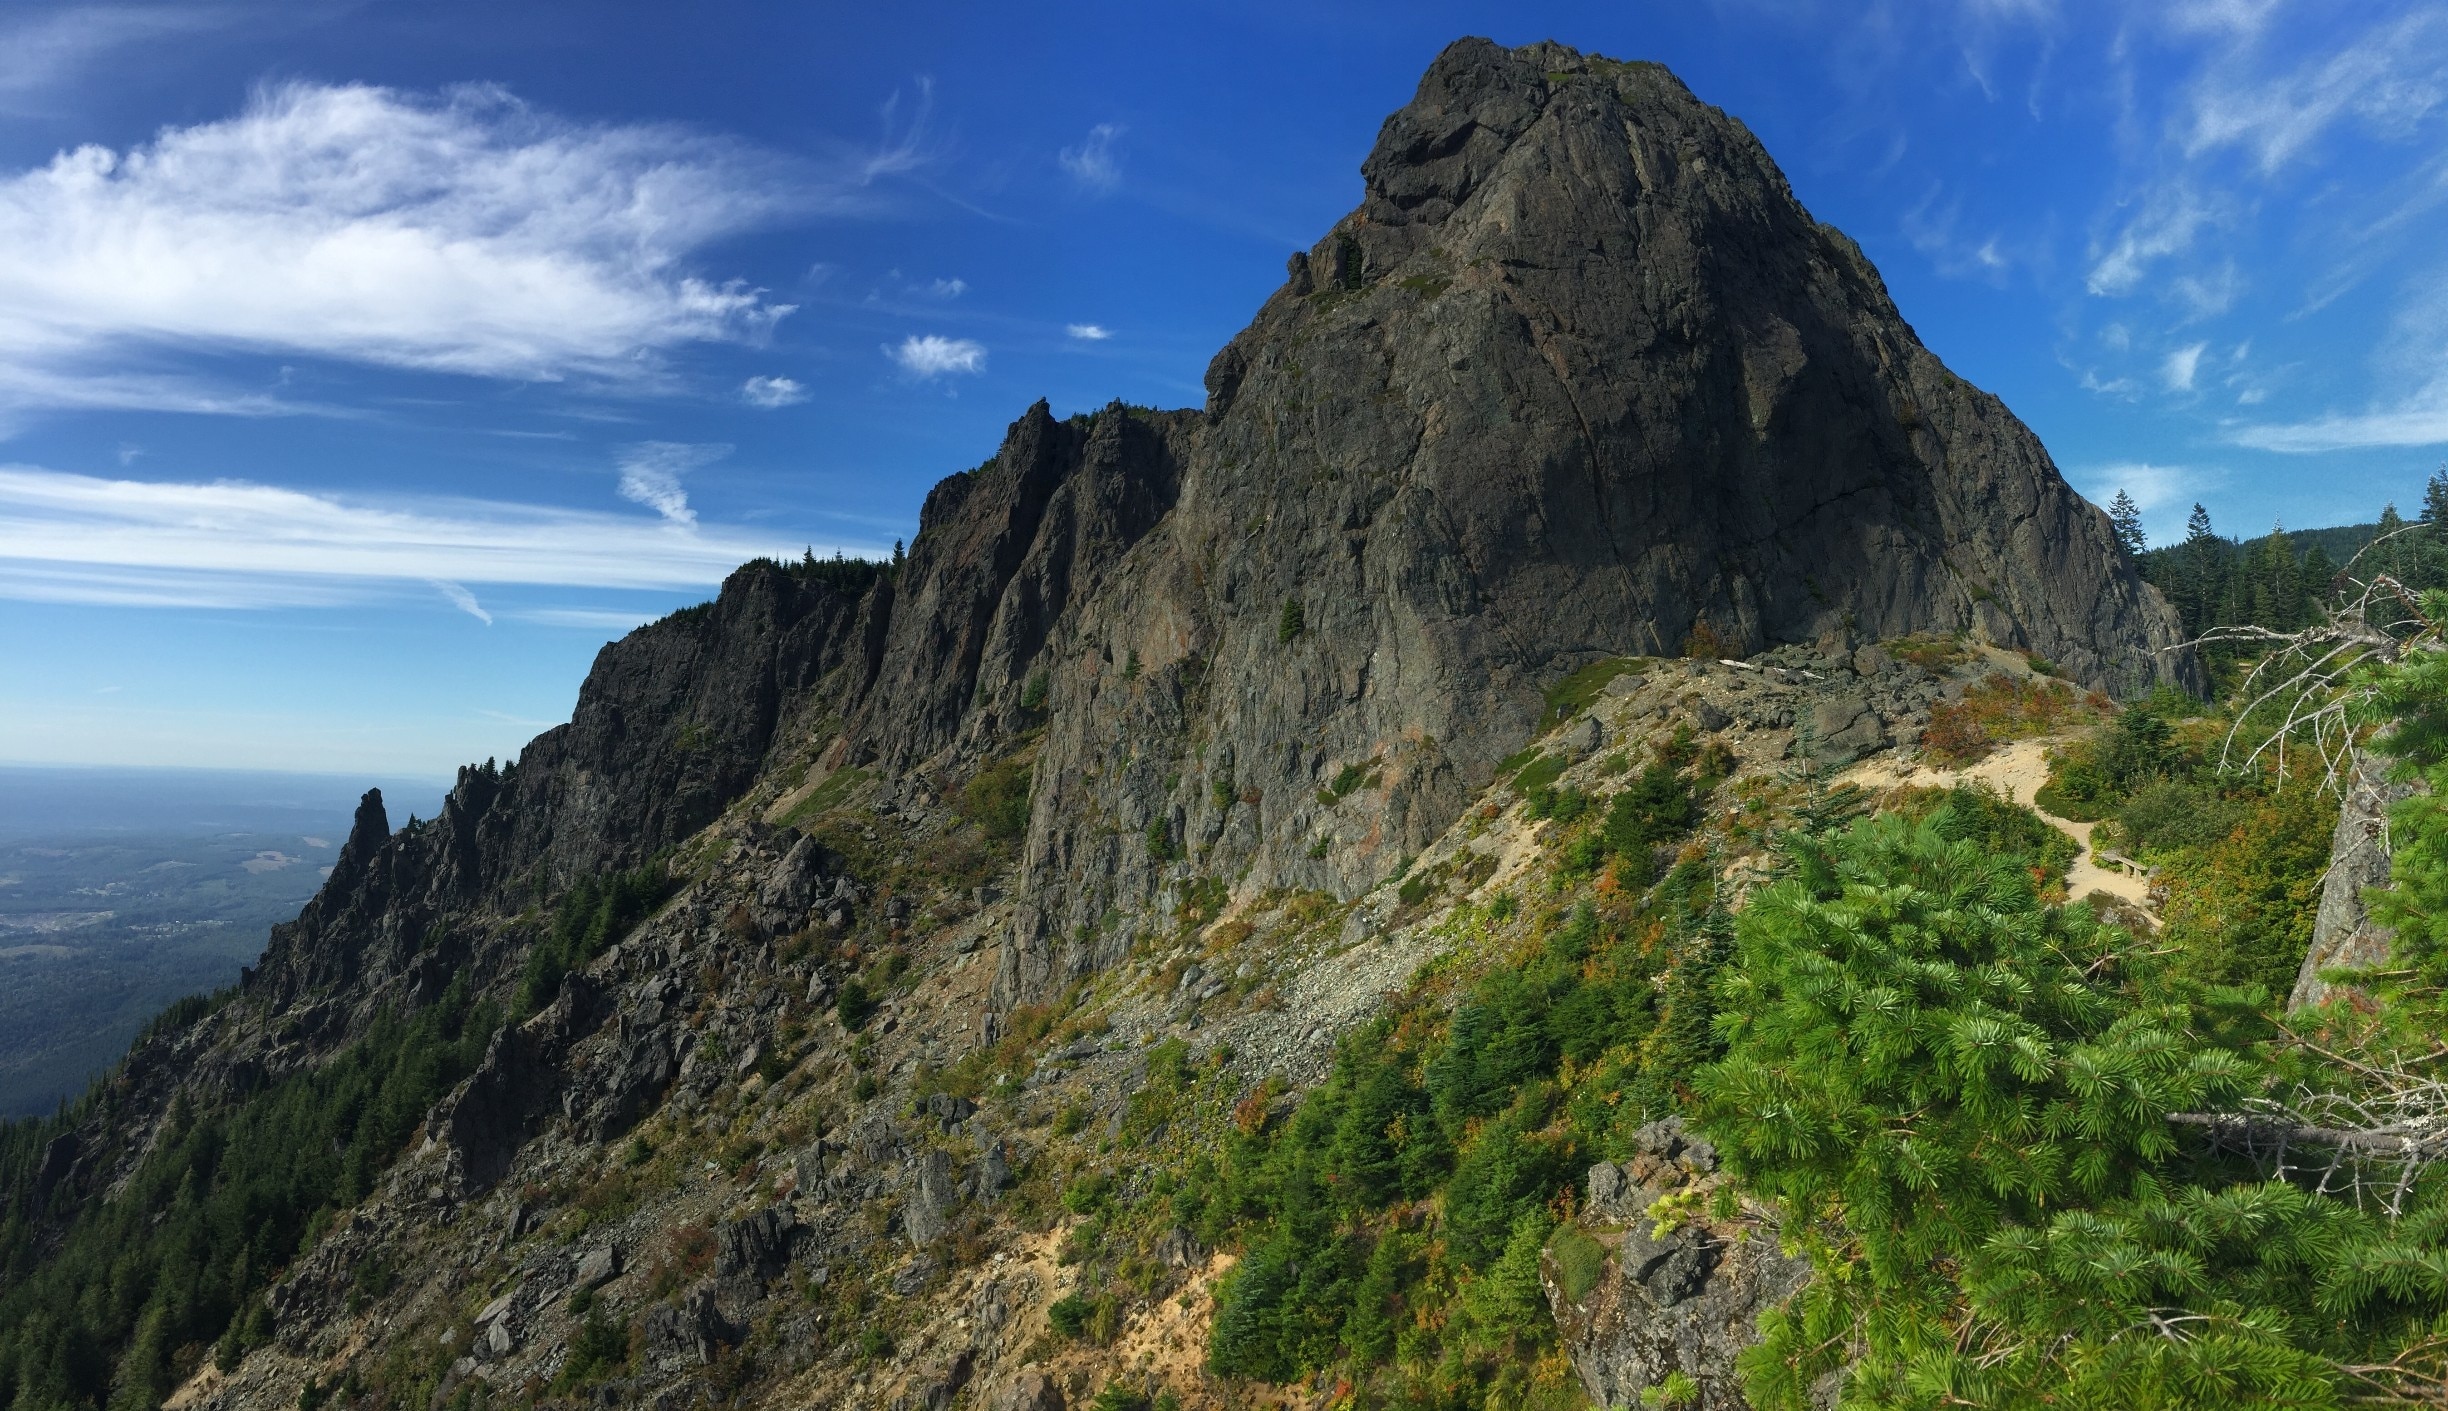 Had a great but challenging hike up to Mt Si today in North Bend WA.  Caught this view of the summit.